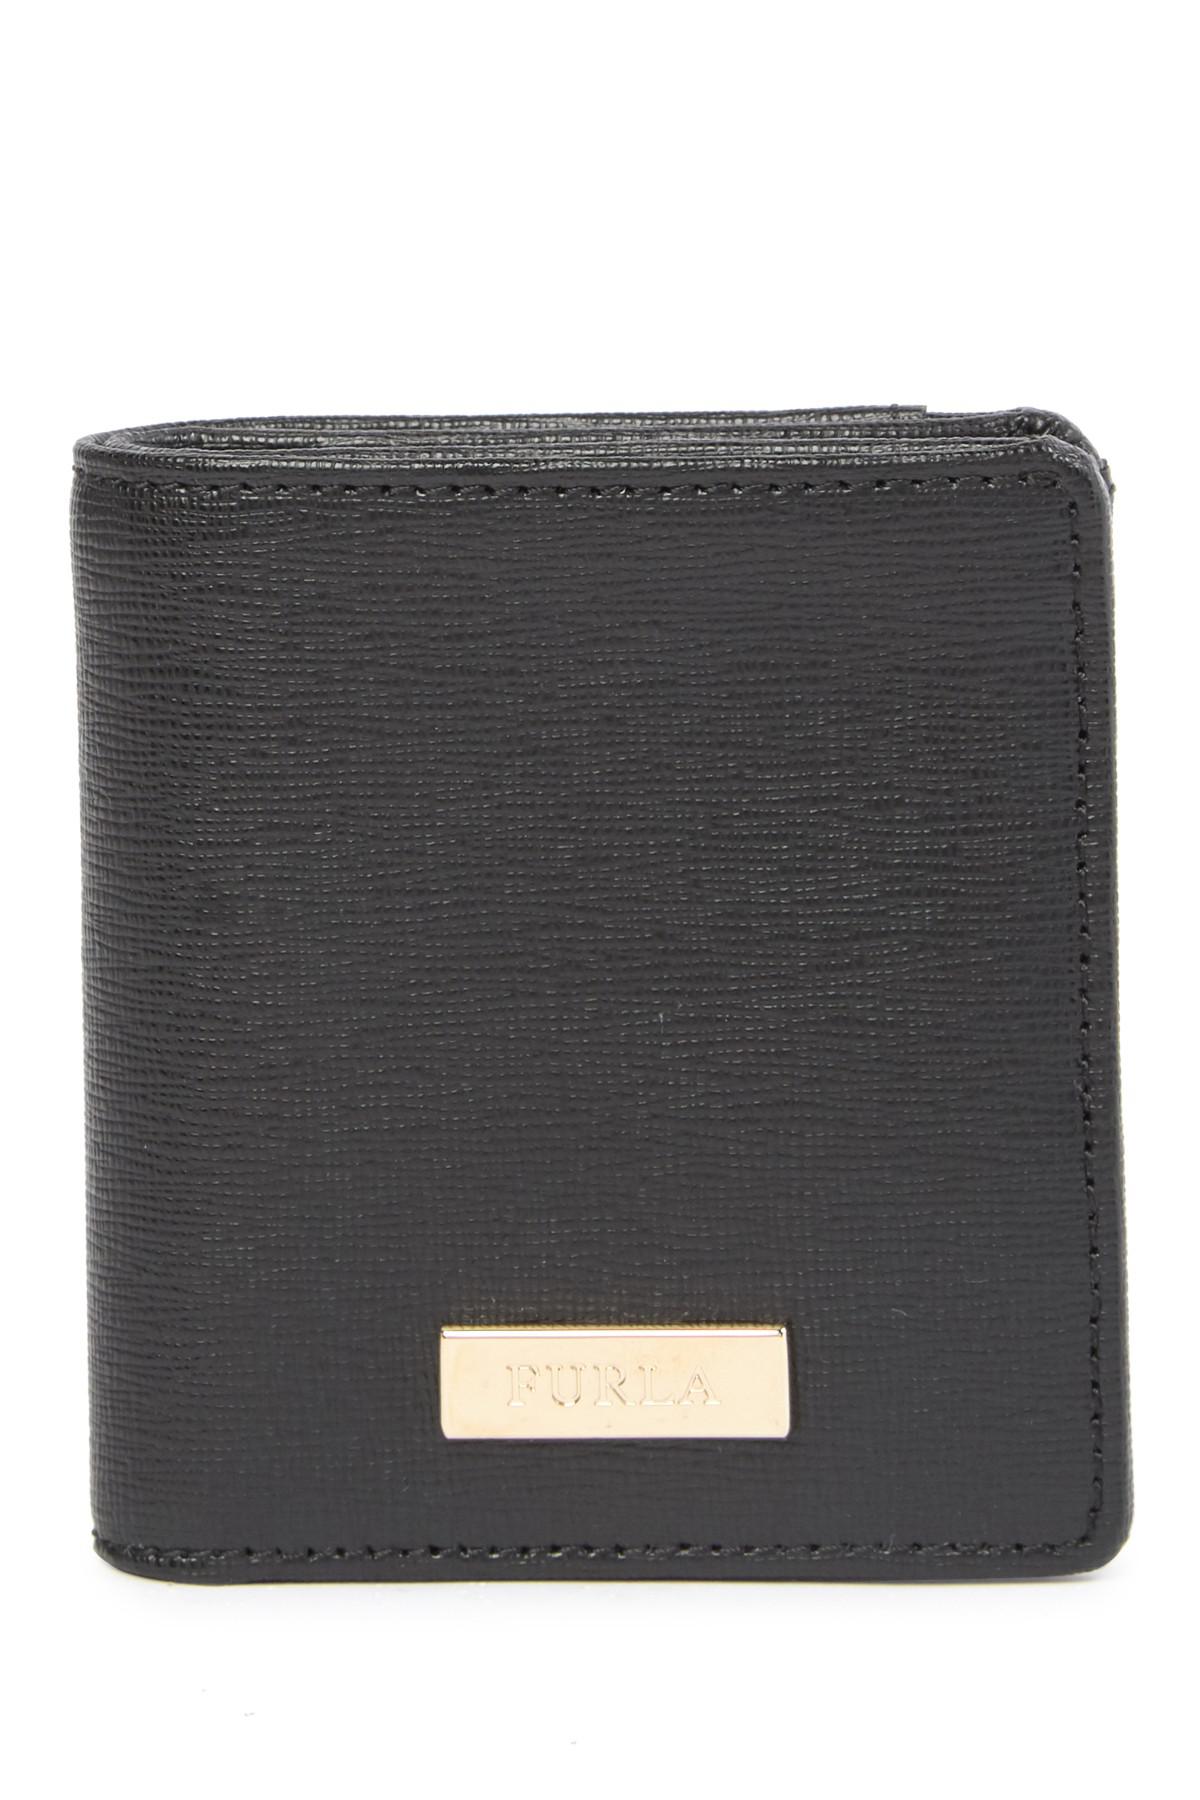 Furla Classic S Leather Bifold Wallet | Lyst